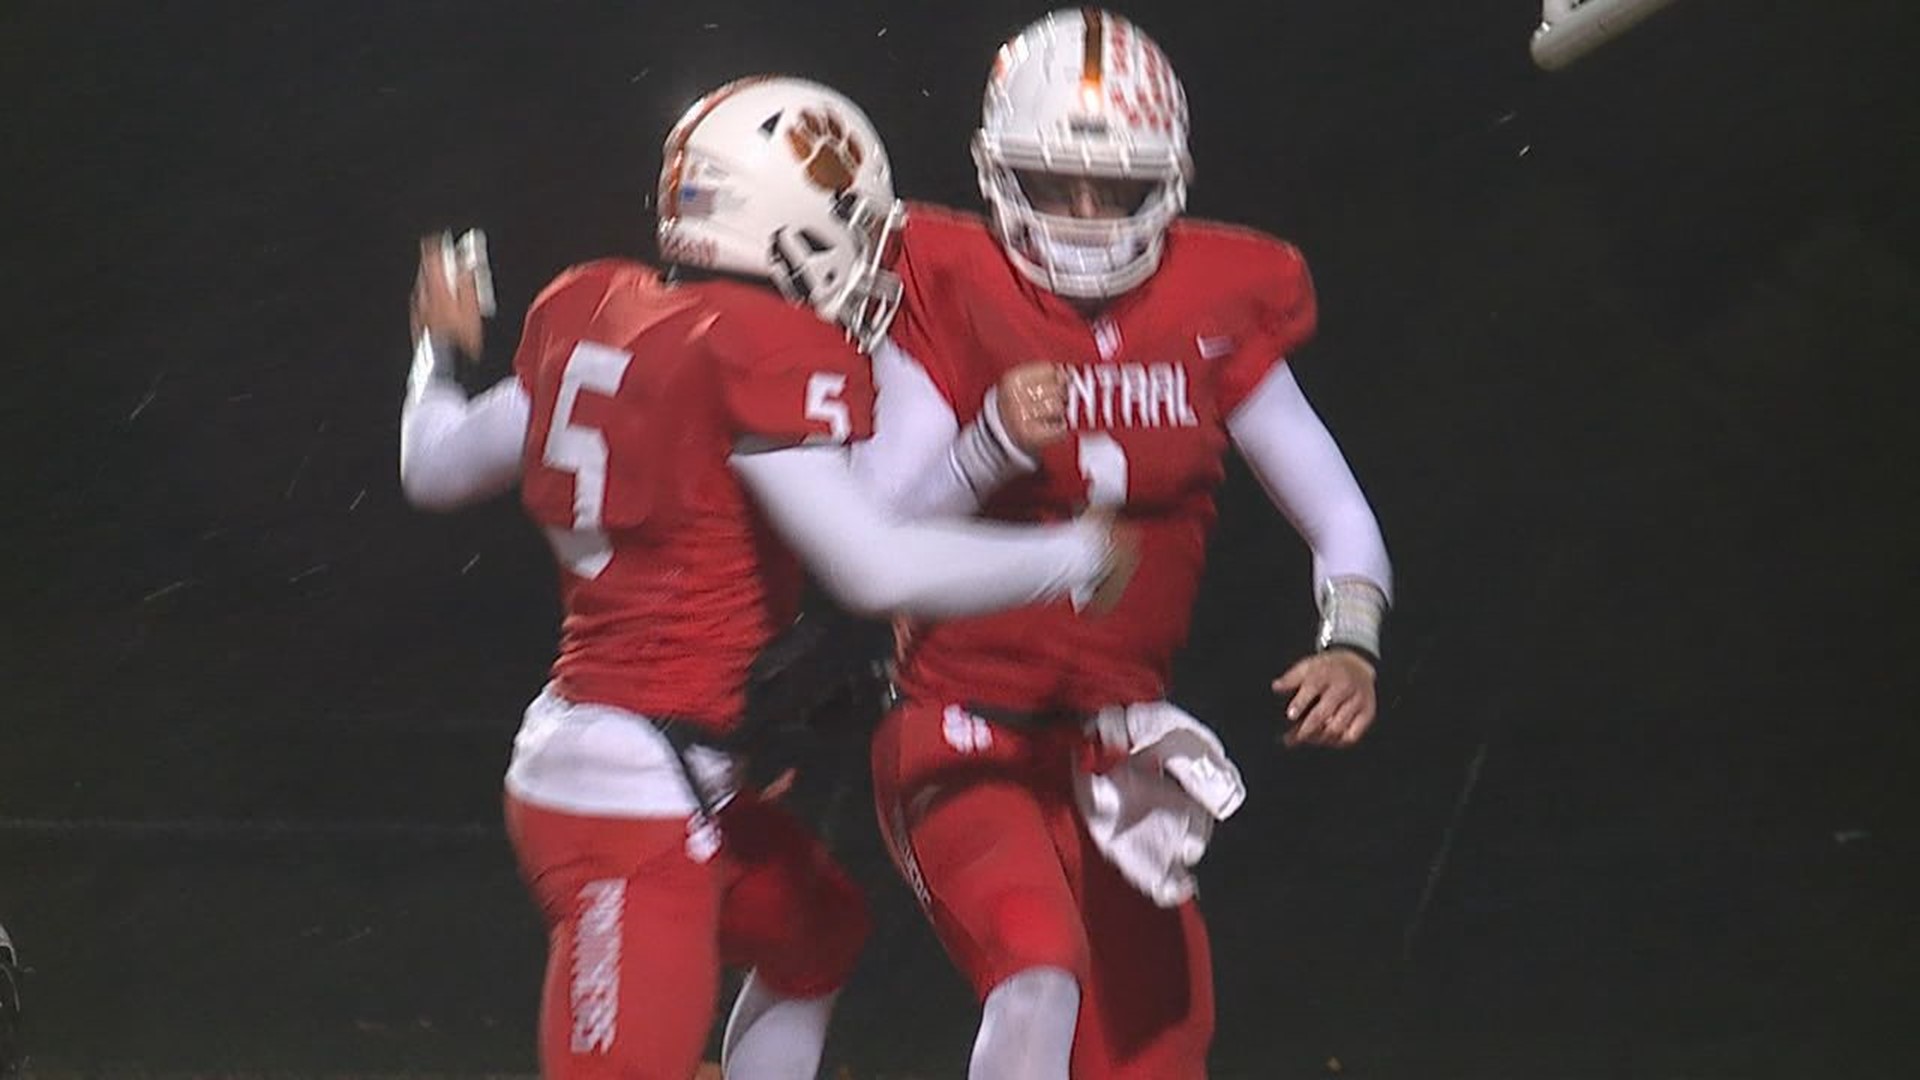 Central York tops rivals York in our Frenzy Game of the Week.